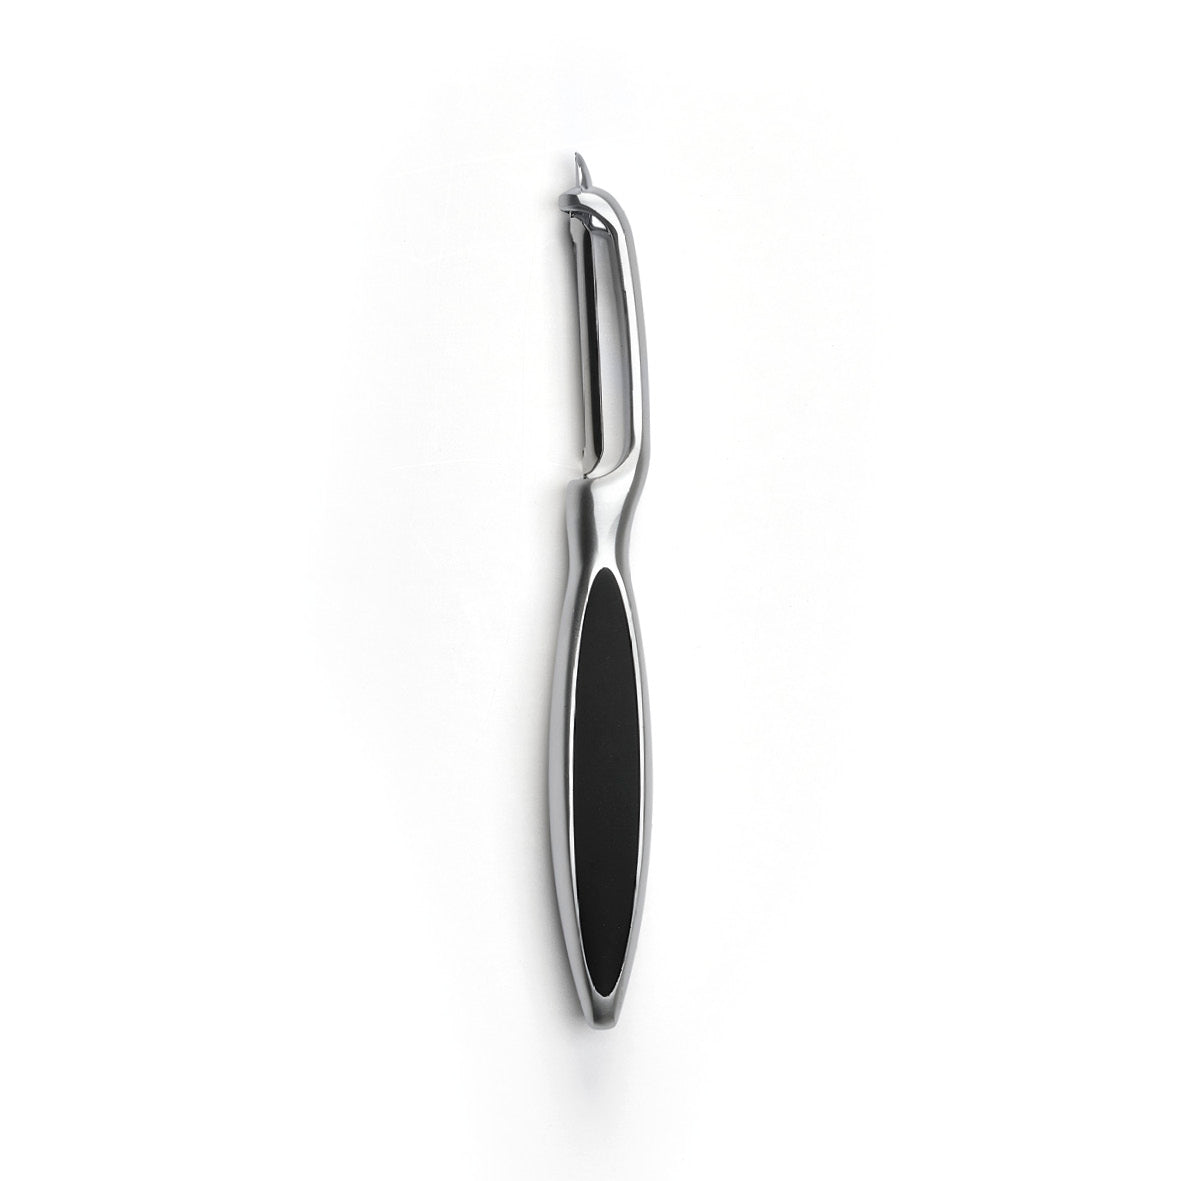 P-peeler with soft touch in stainless steel - grey/black